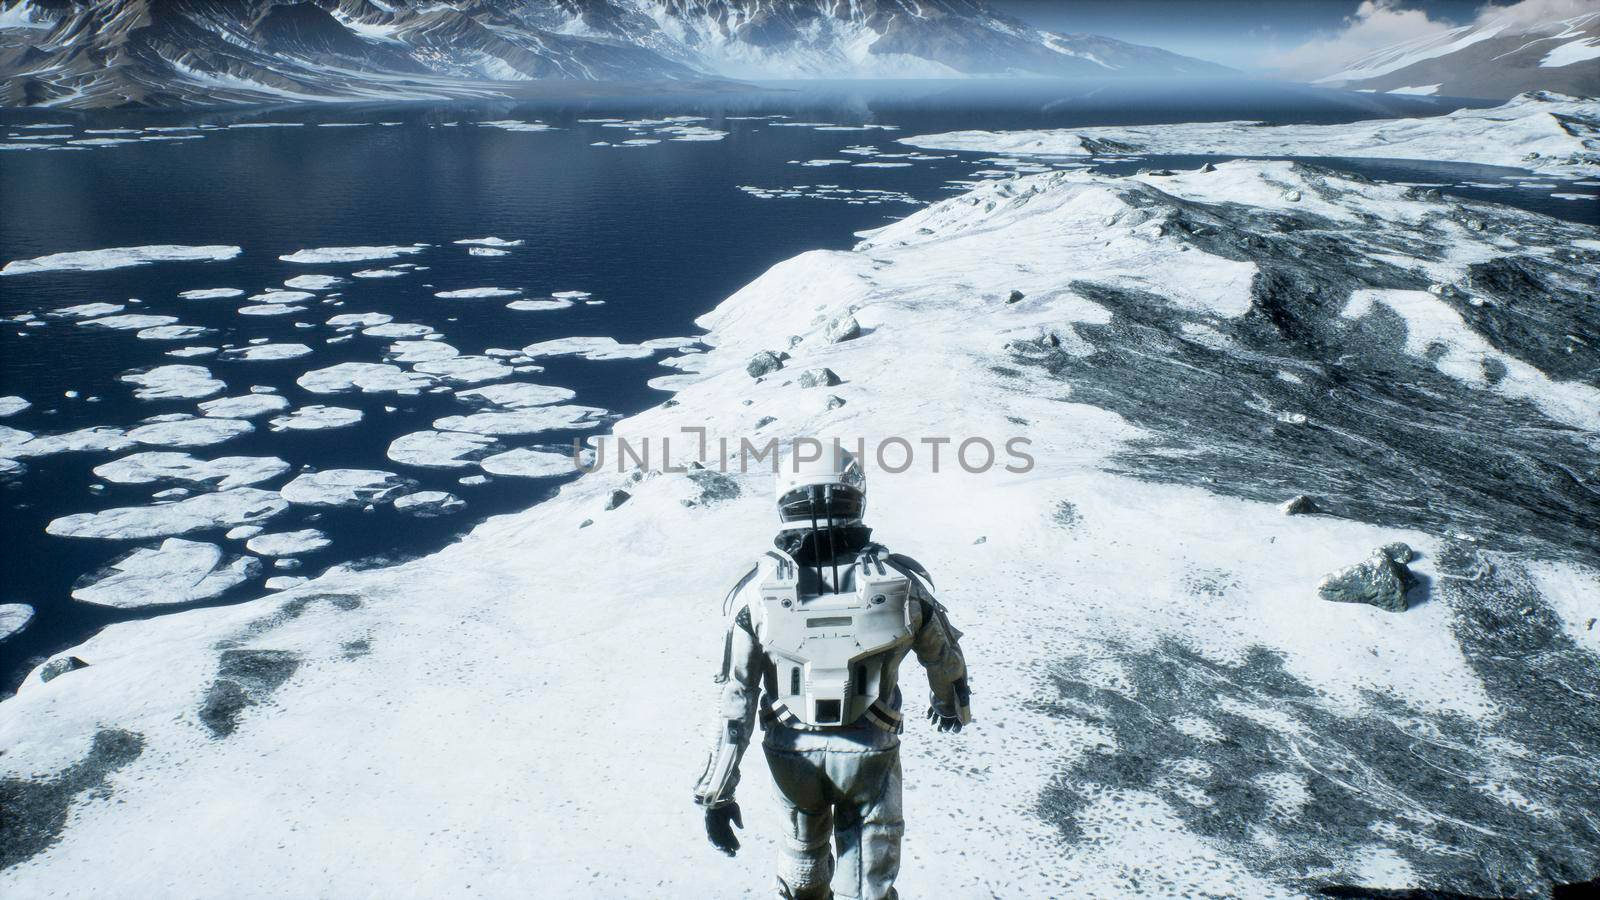 The astronaut is walking on a new unknown snow planet under alien constellations and nebulae.